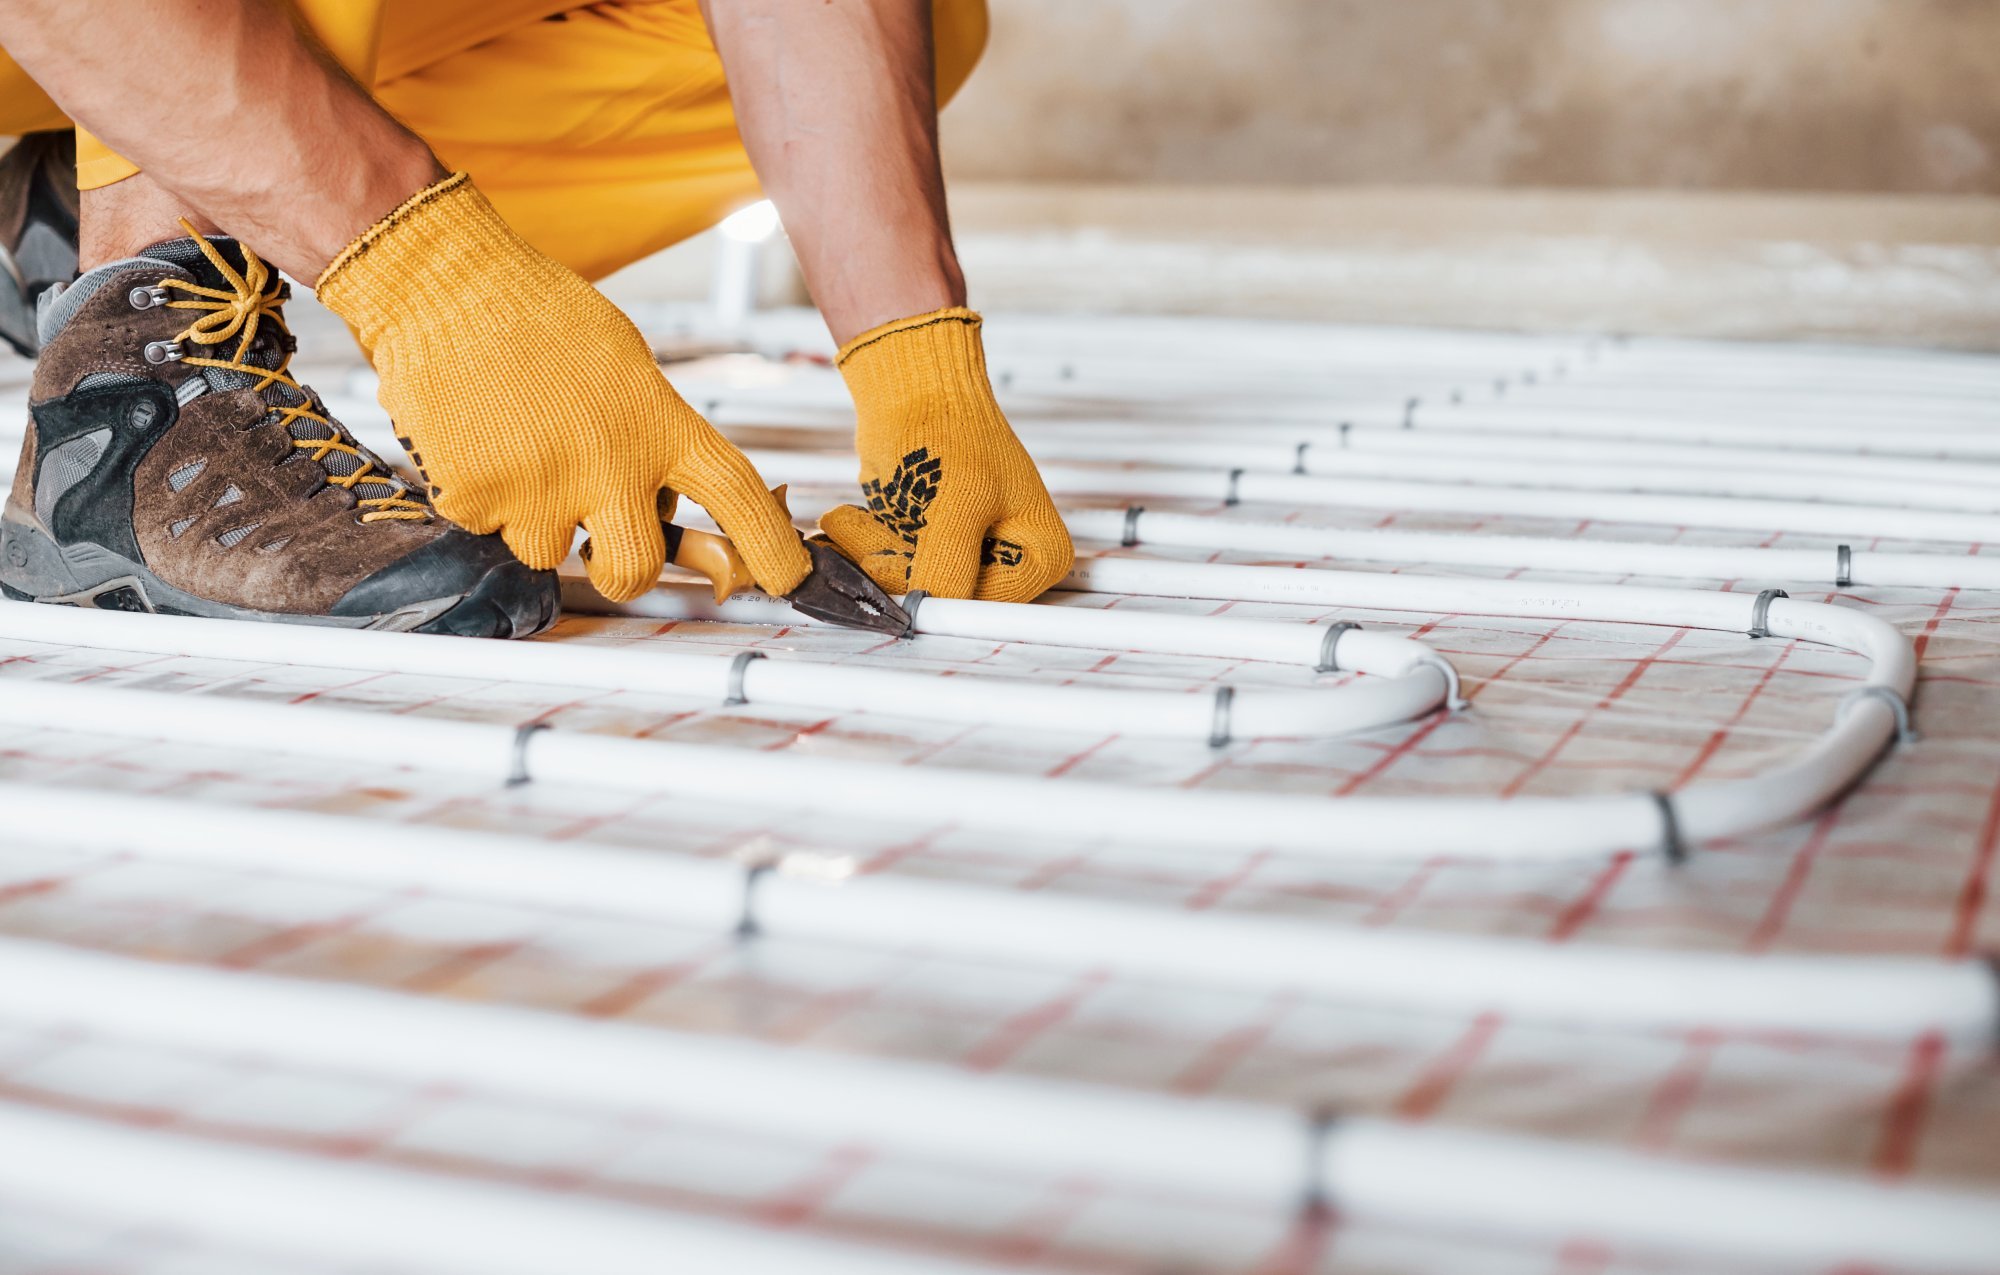 close-up-view-worker-yellow-colored-uniform-installing-underfloor-heating-system.jpg